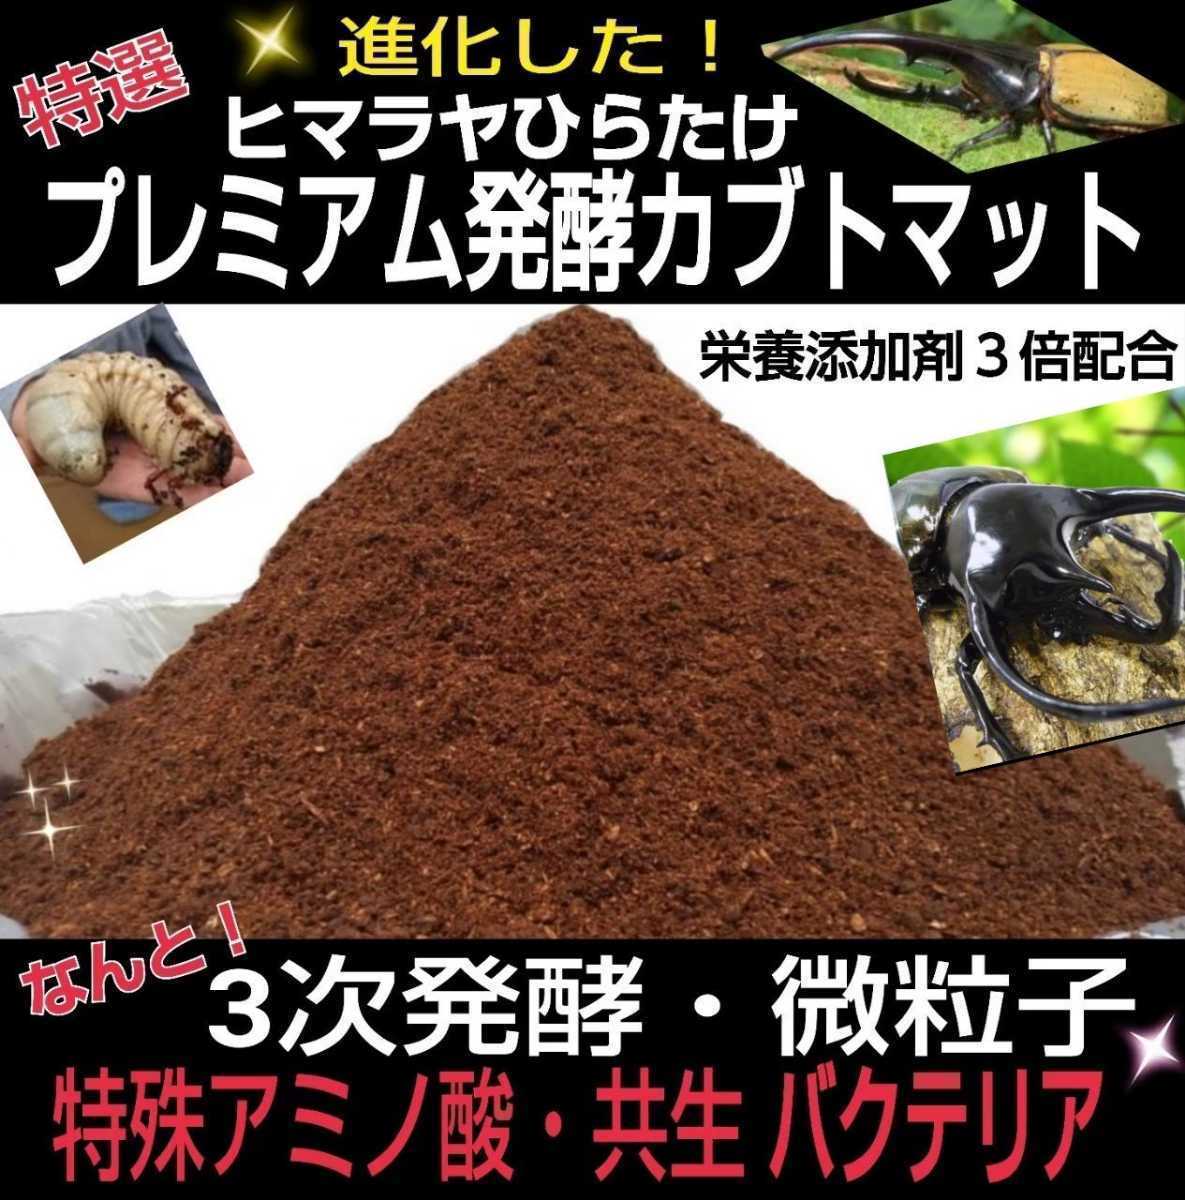  finest quality! premium 3 next departure . rhinoceros beetle mat [6 sack ]tore Hello s* chitosan * symbiosis bacteria 3 times combination production egg also eminent. . insect ... not!